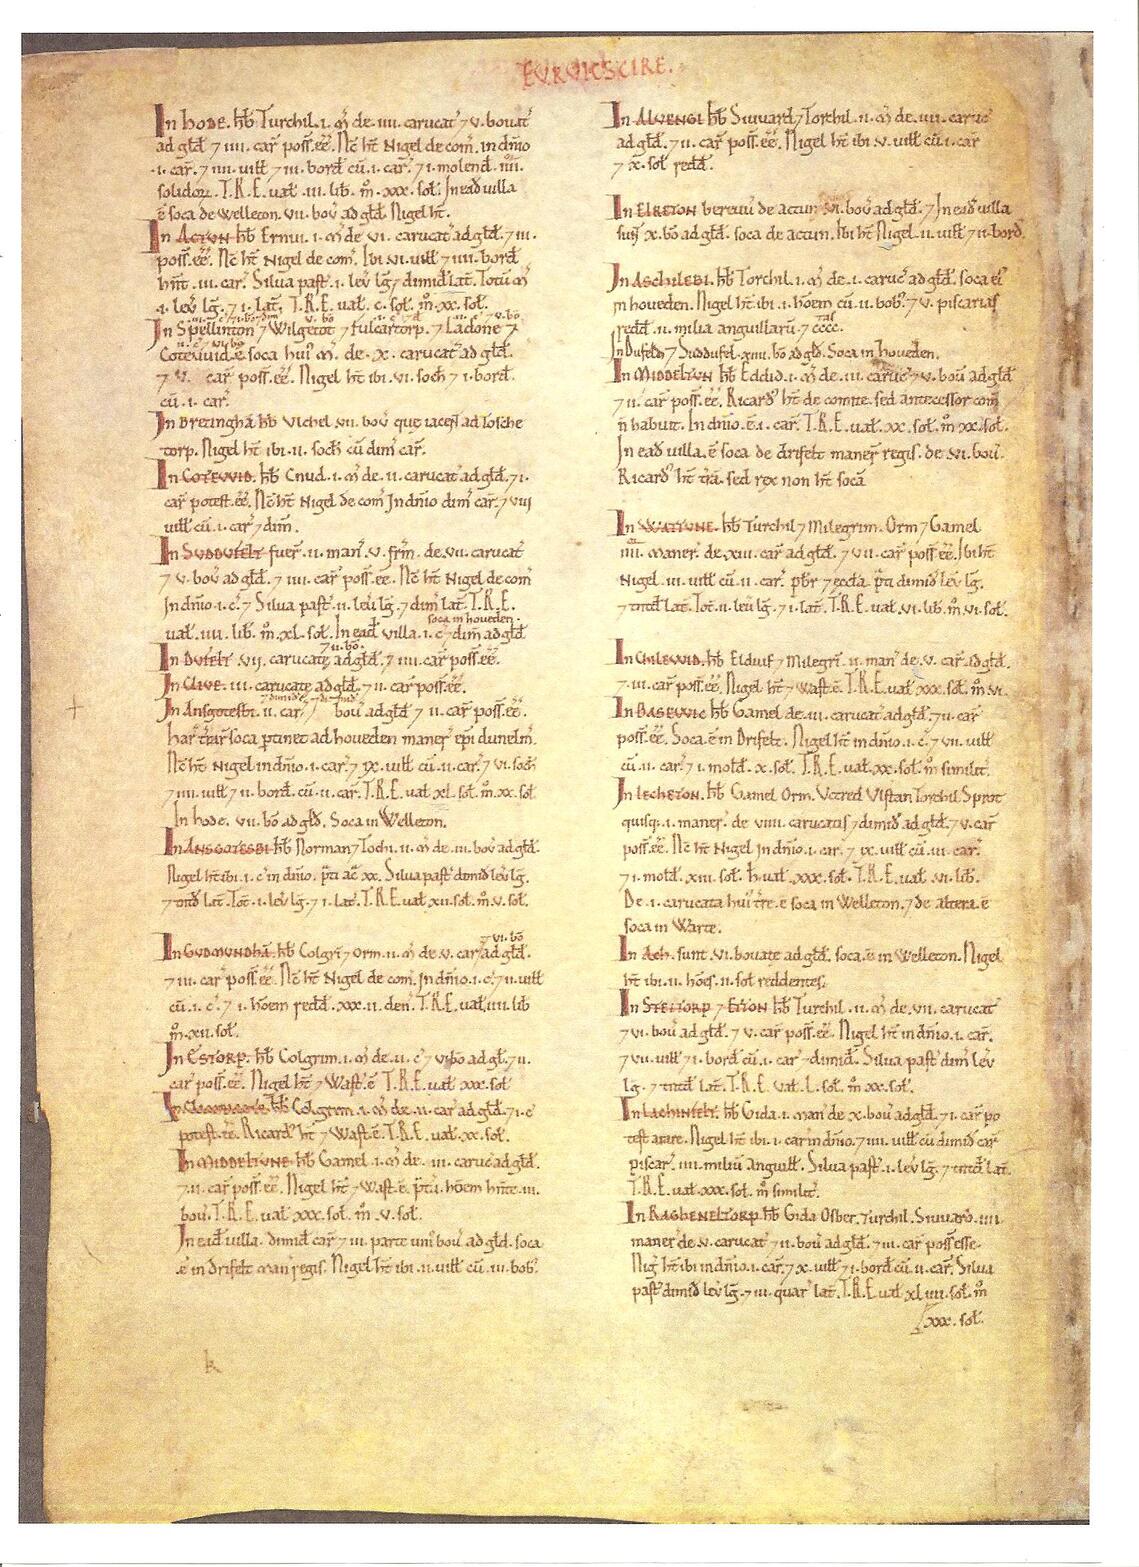 Domesday document